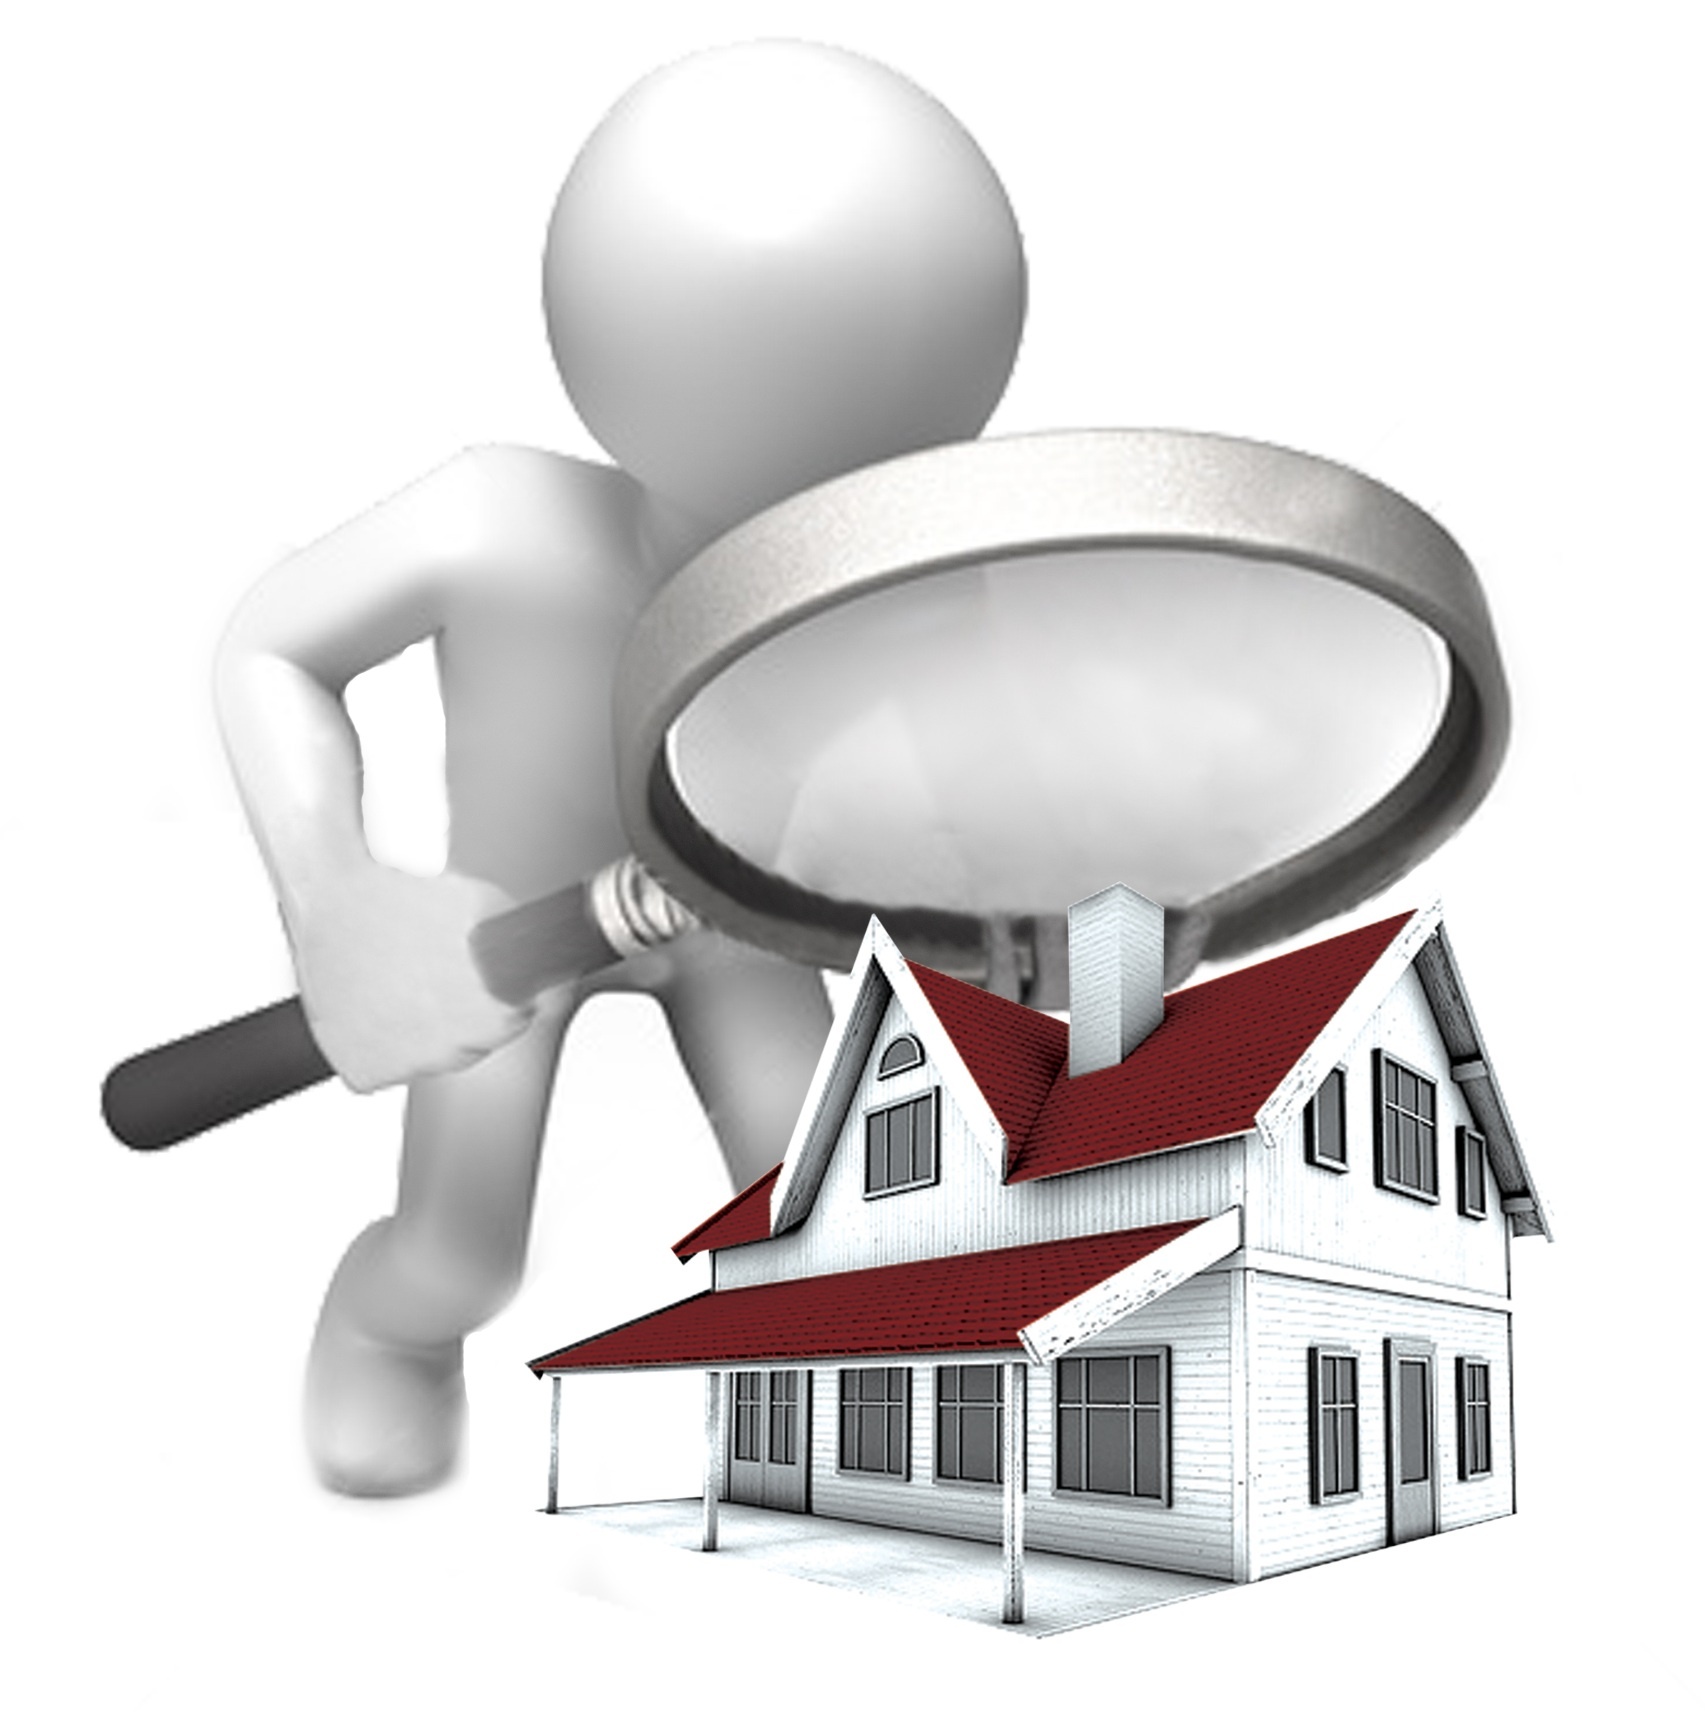 home inspection clipart - photo #14